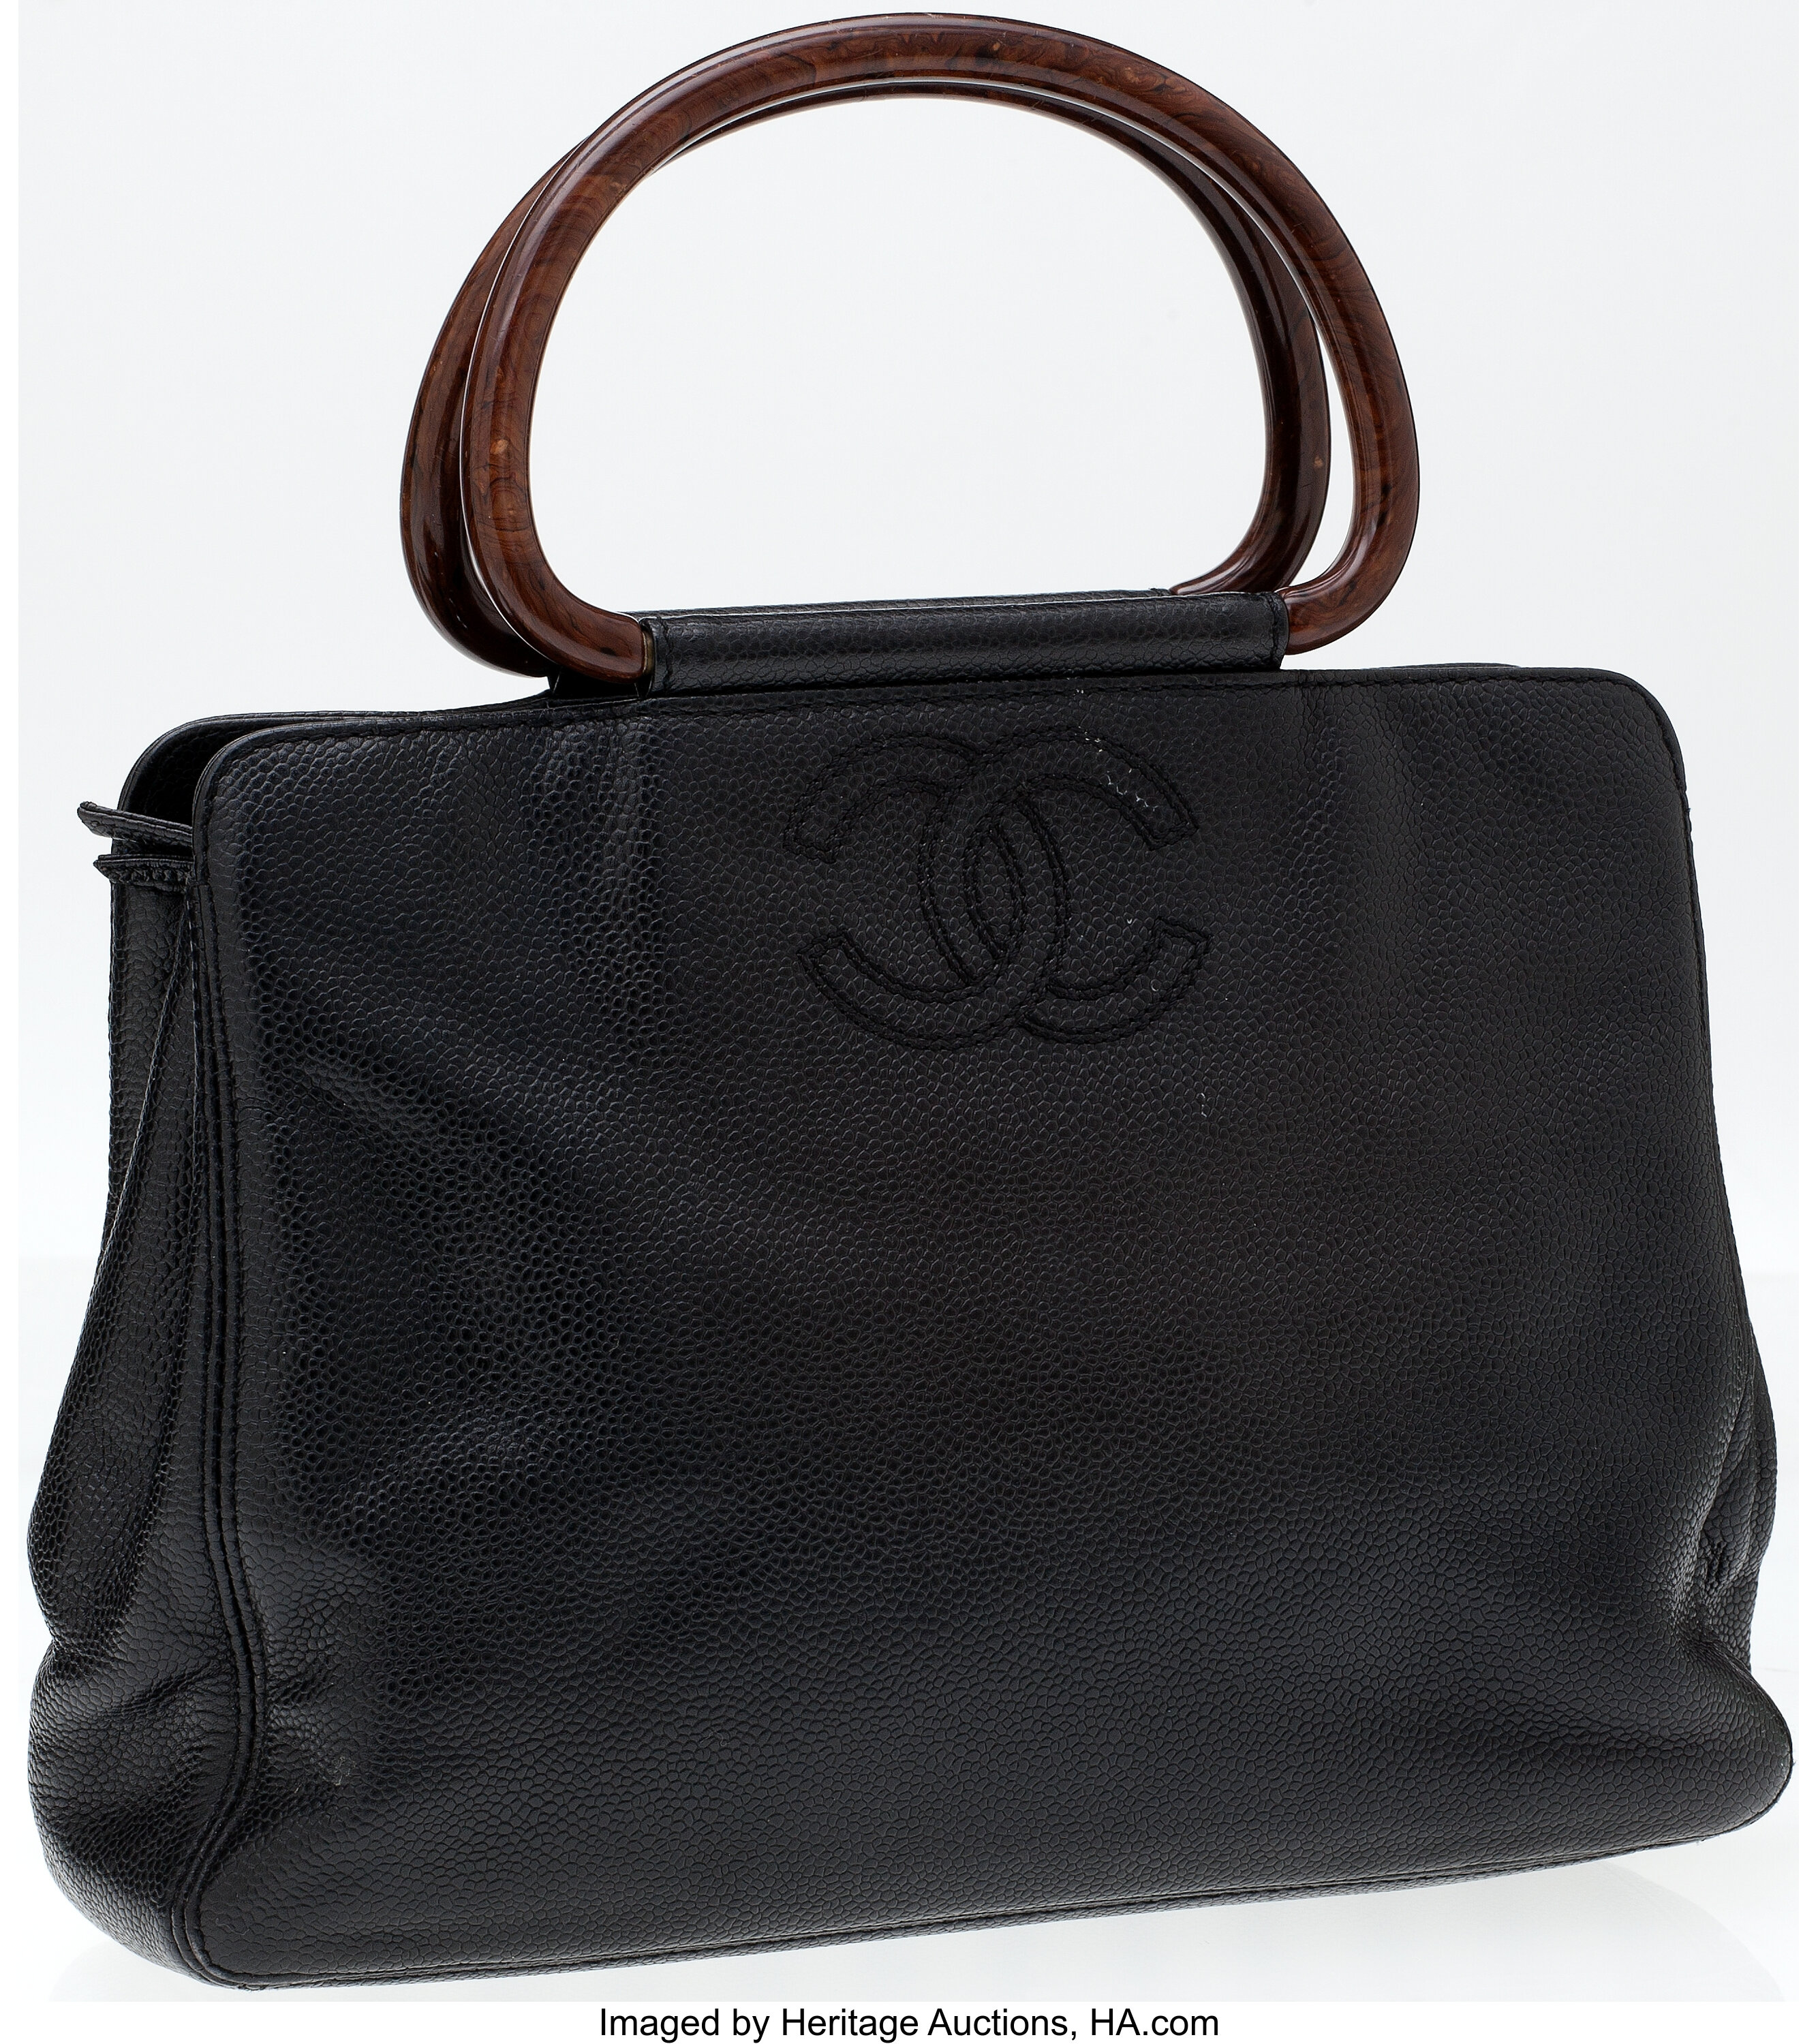 Heritage Vintage: Chanel Black Caviar Leather Bag with Wood Top